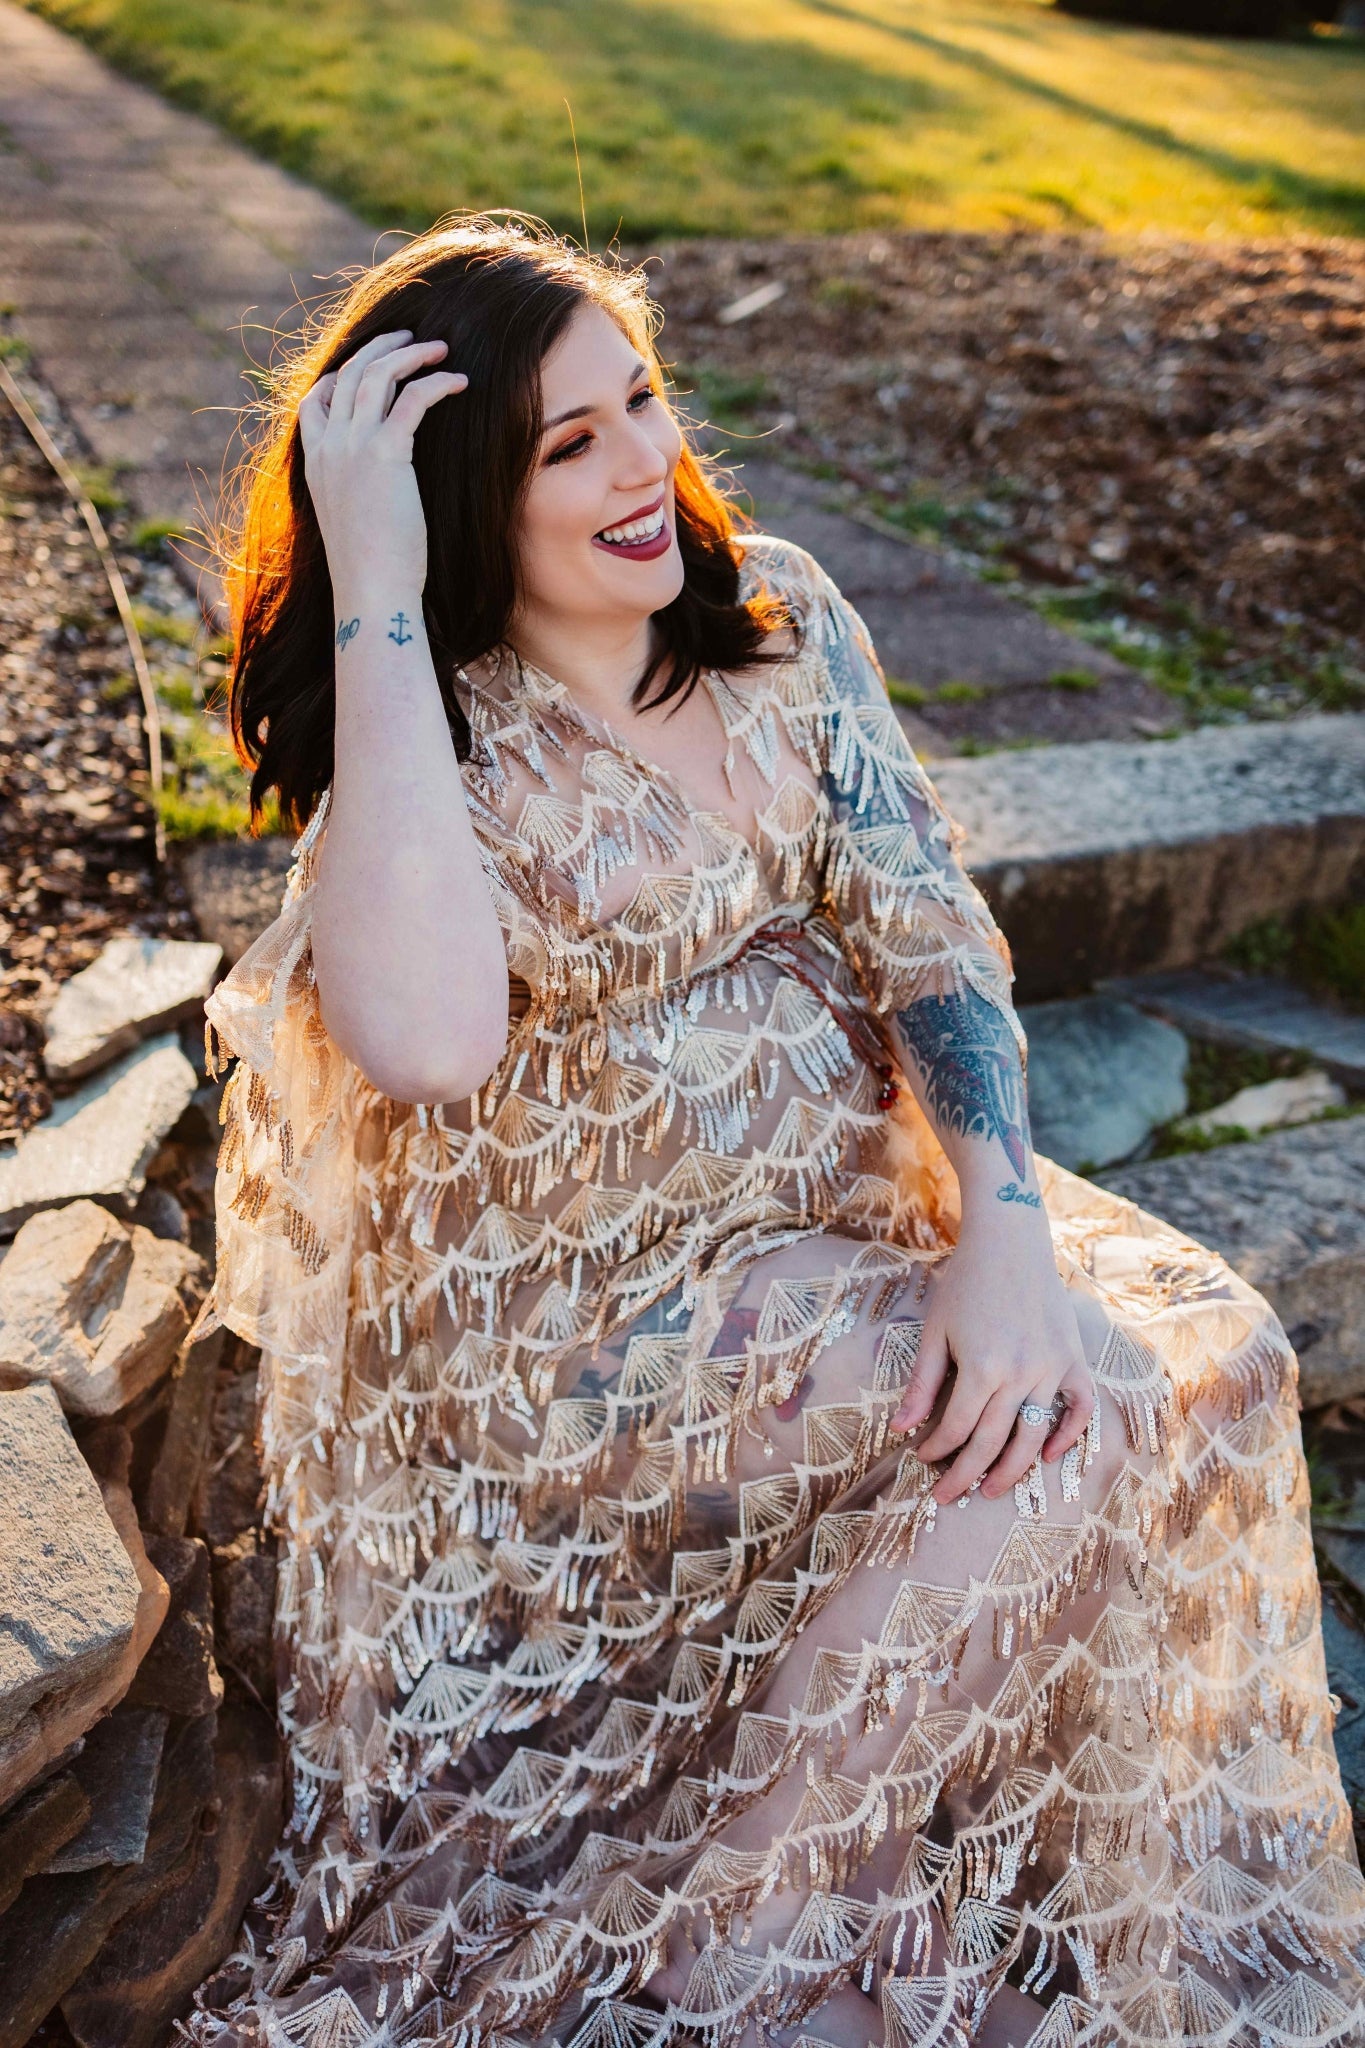 *Rental* Scalloped Tassel Sequin Photography Gown